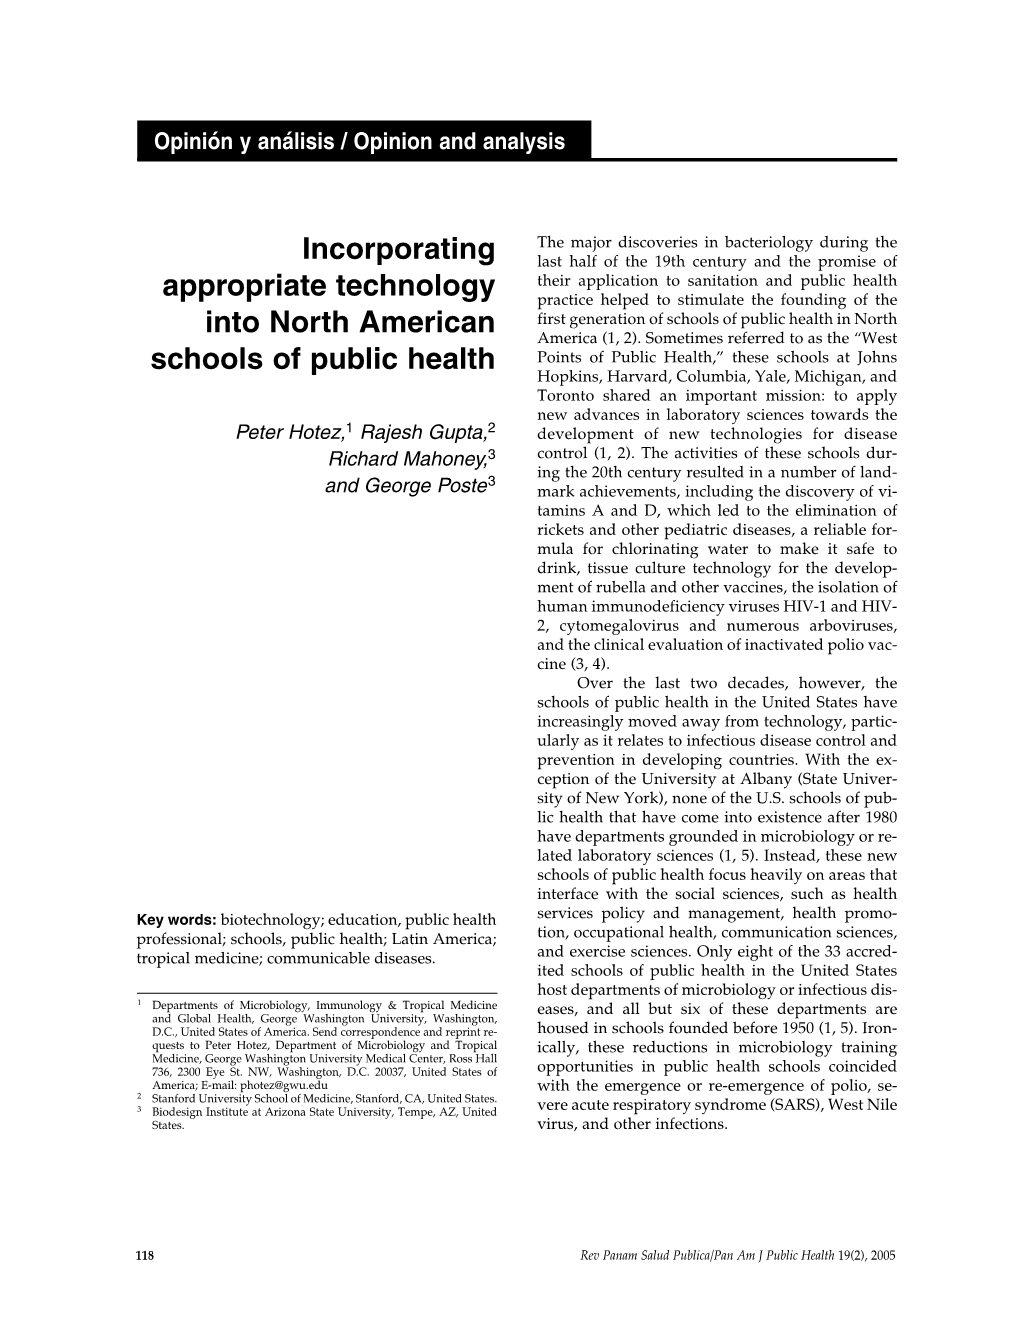 Incorporating Appropriate Technology Into North American Schools Of